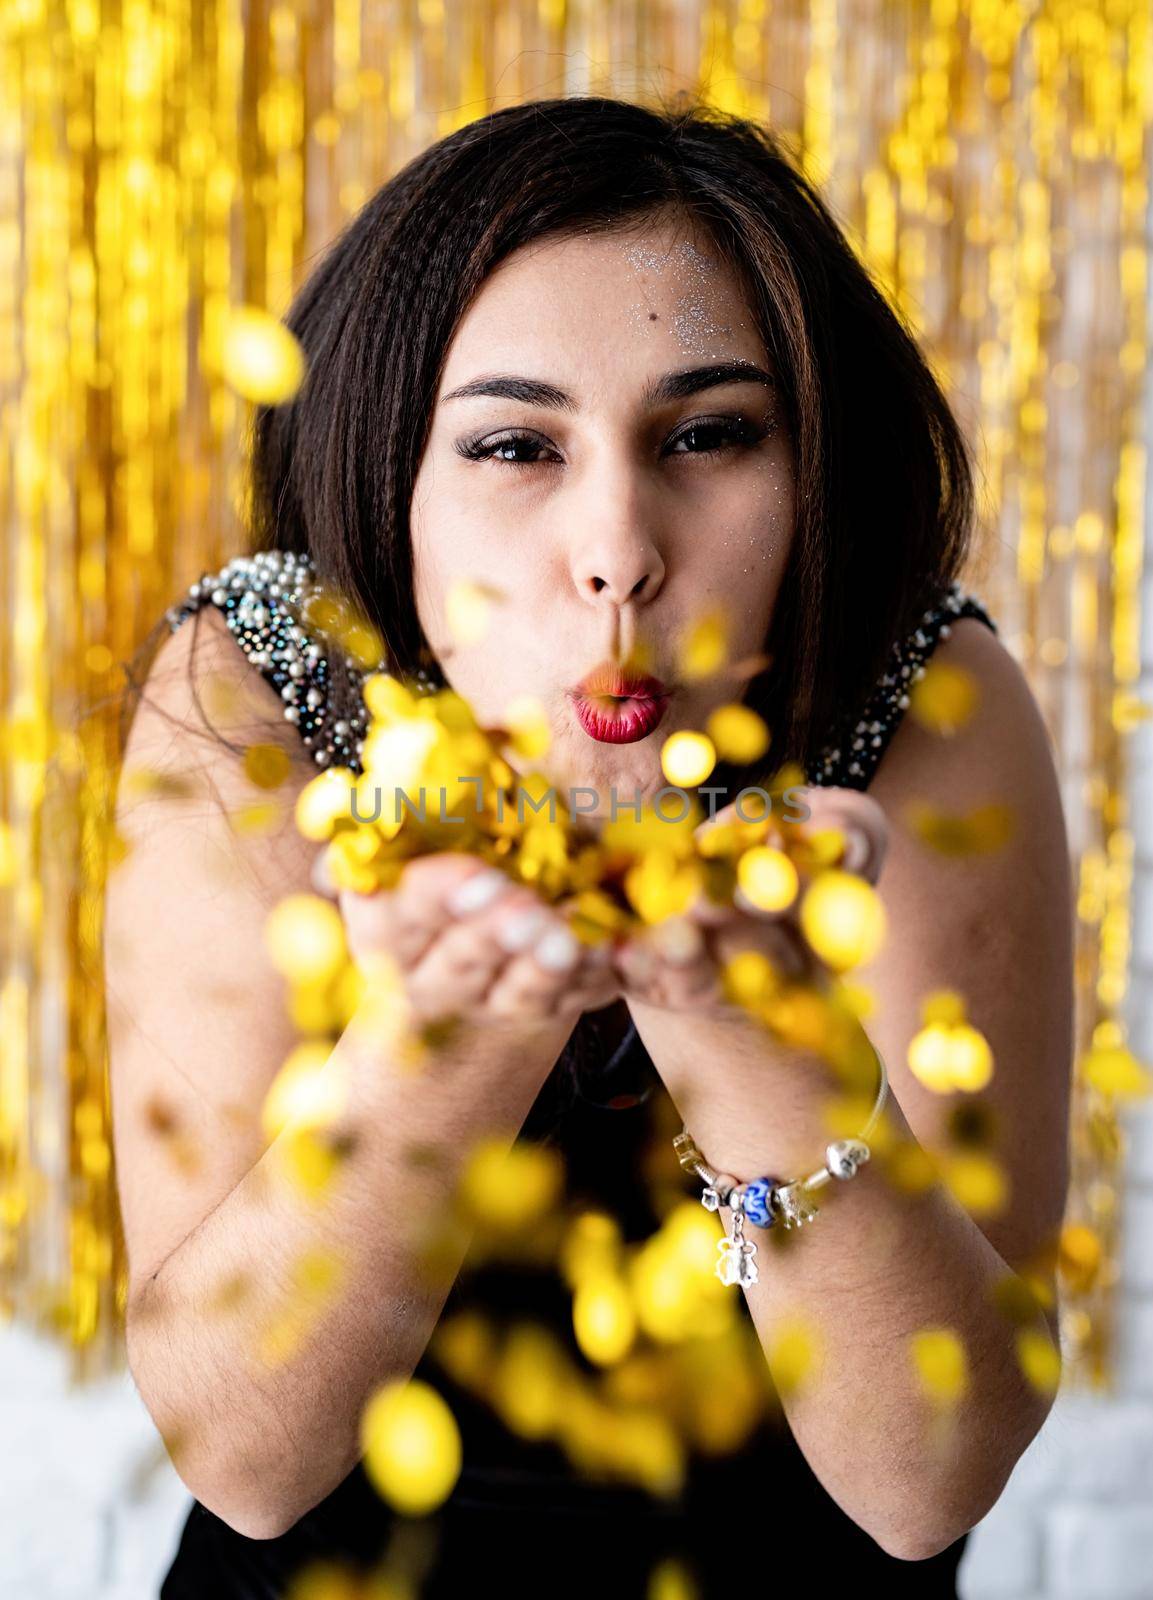 Birthday party. Portrait of young beautiful girl blowing golden confetti at holiday party